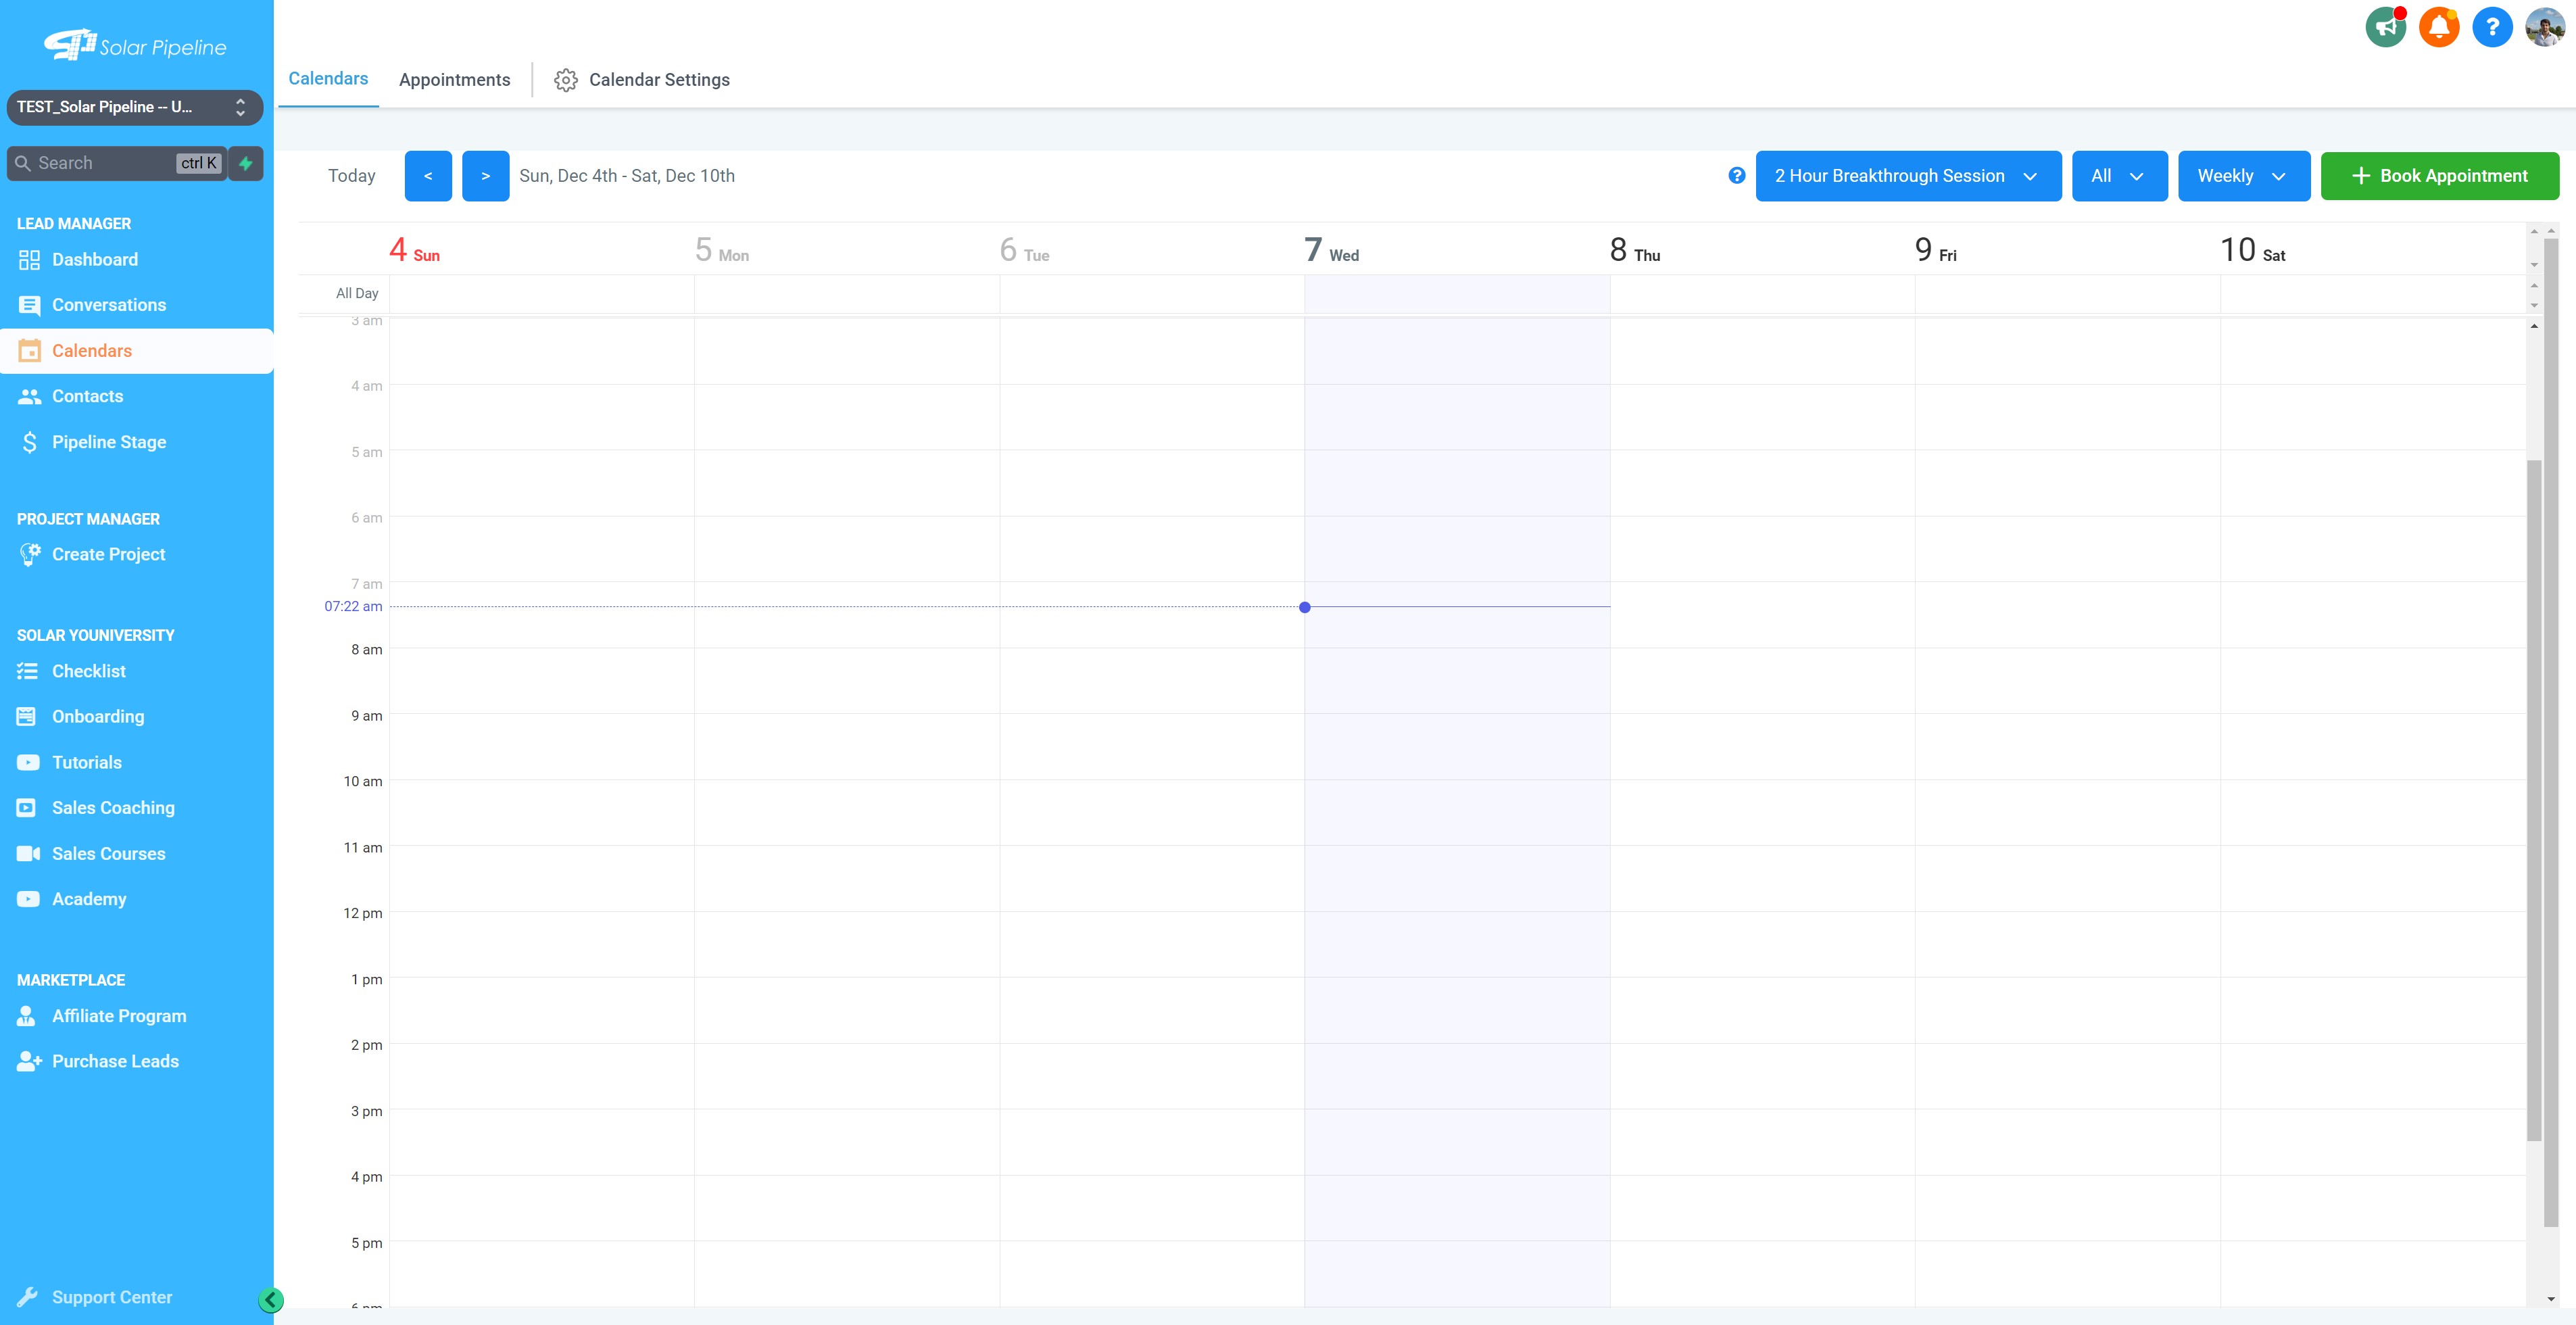 Solar Consultations Calendar. Book In-house or virtual meetings. Integrate your calendar with Google or Zoom. Manage your team's calendar and appointments.